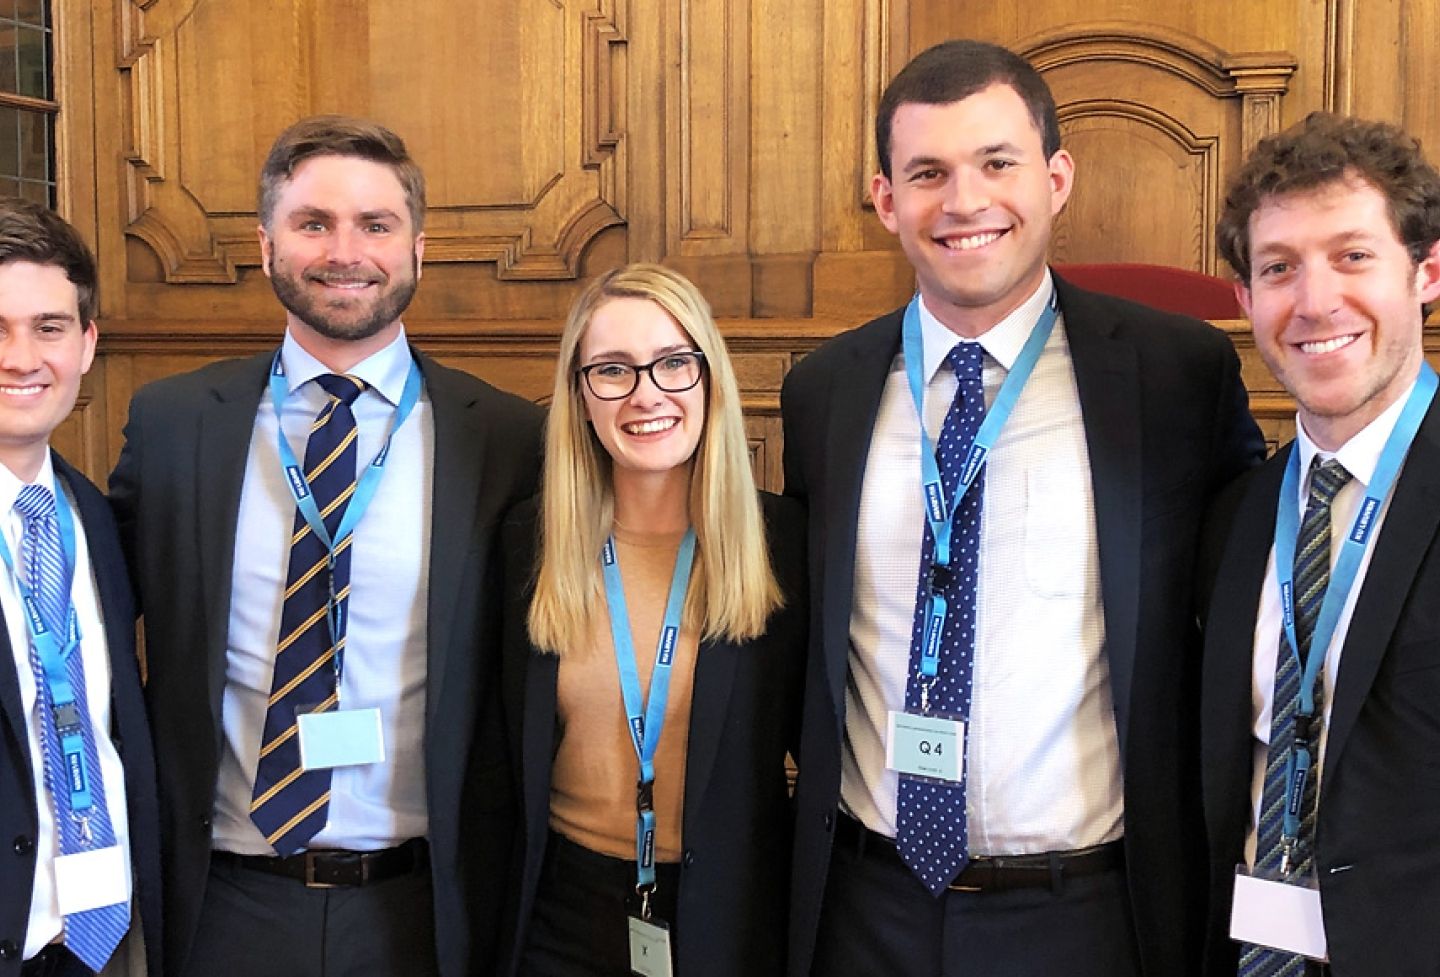 UVA Law’s student team — with Colin Giuseppe Cox ’19, Elizabeth Donald ’19, Benjamin Kramer ’19 and Griffin Peeples ’20, and student coach David Rubin ’19 — won the International and European Tax Moot Court for the second straight year.